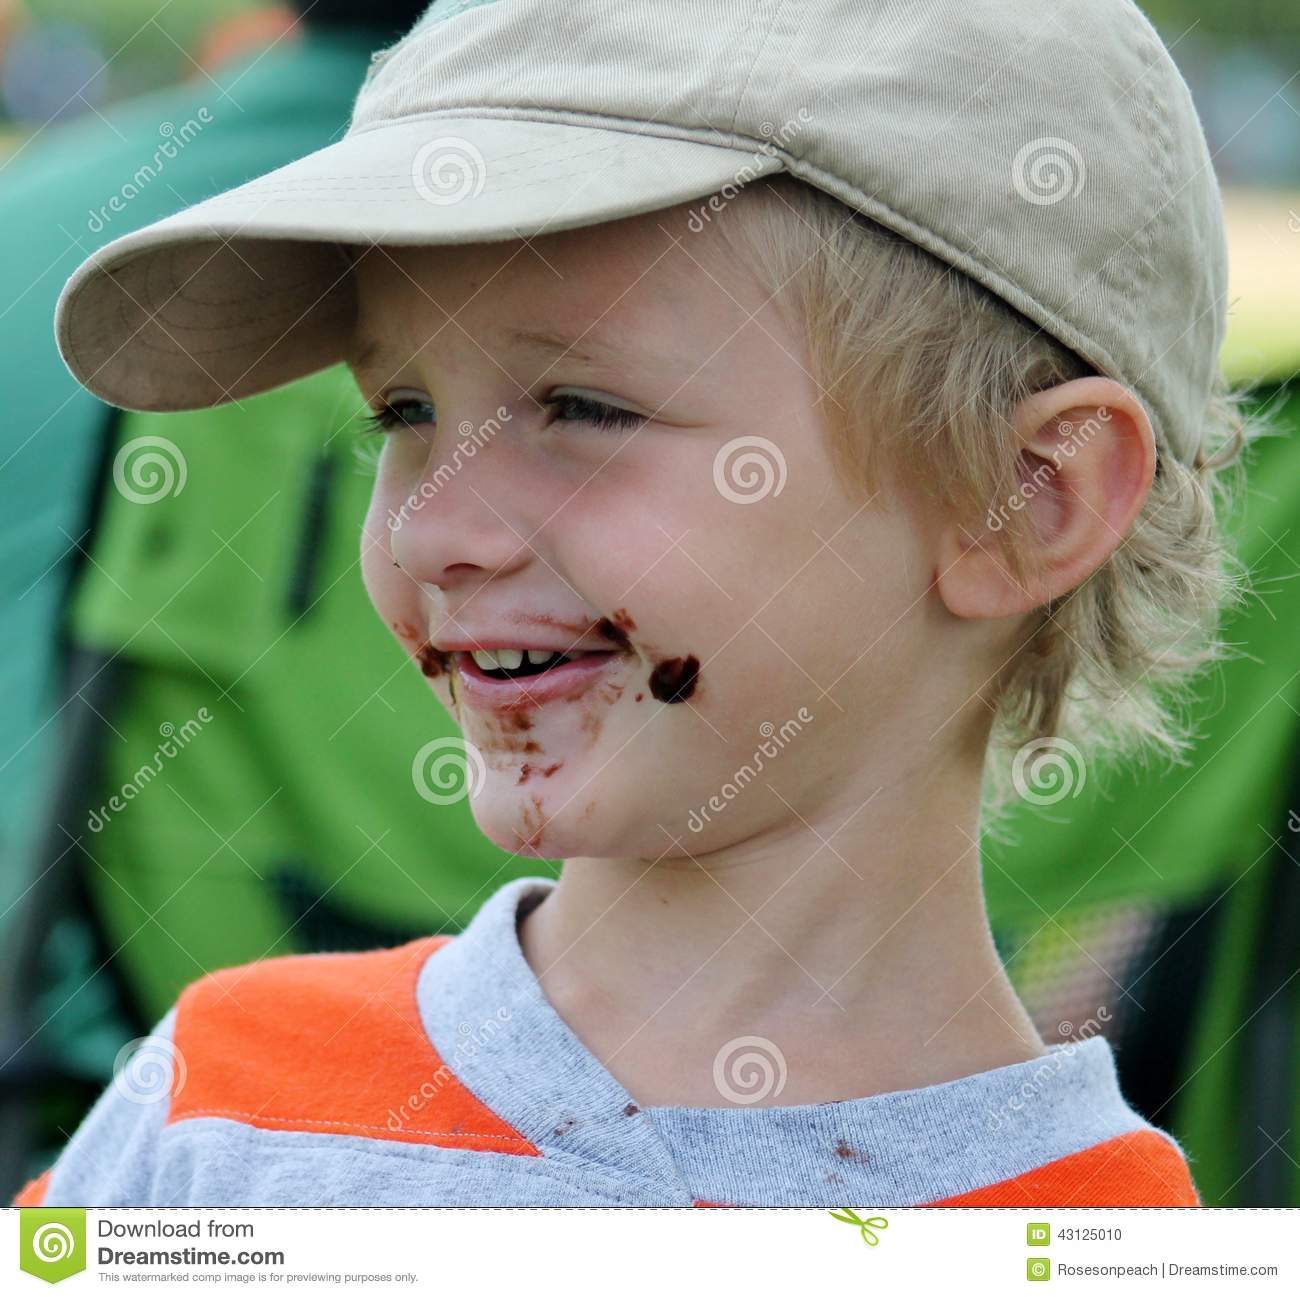 Chocolate Messy Faced Toddler Boy Stock Photo   Image  43125010